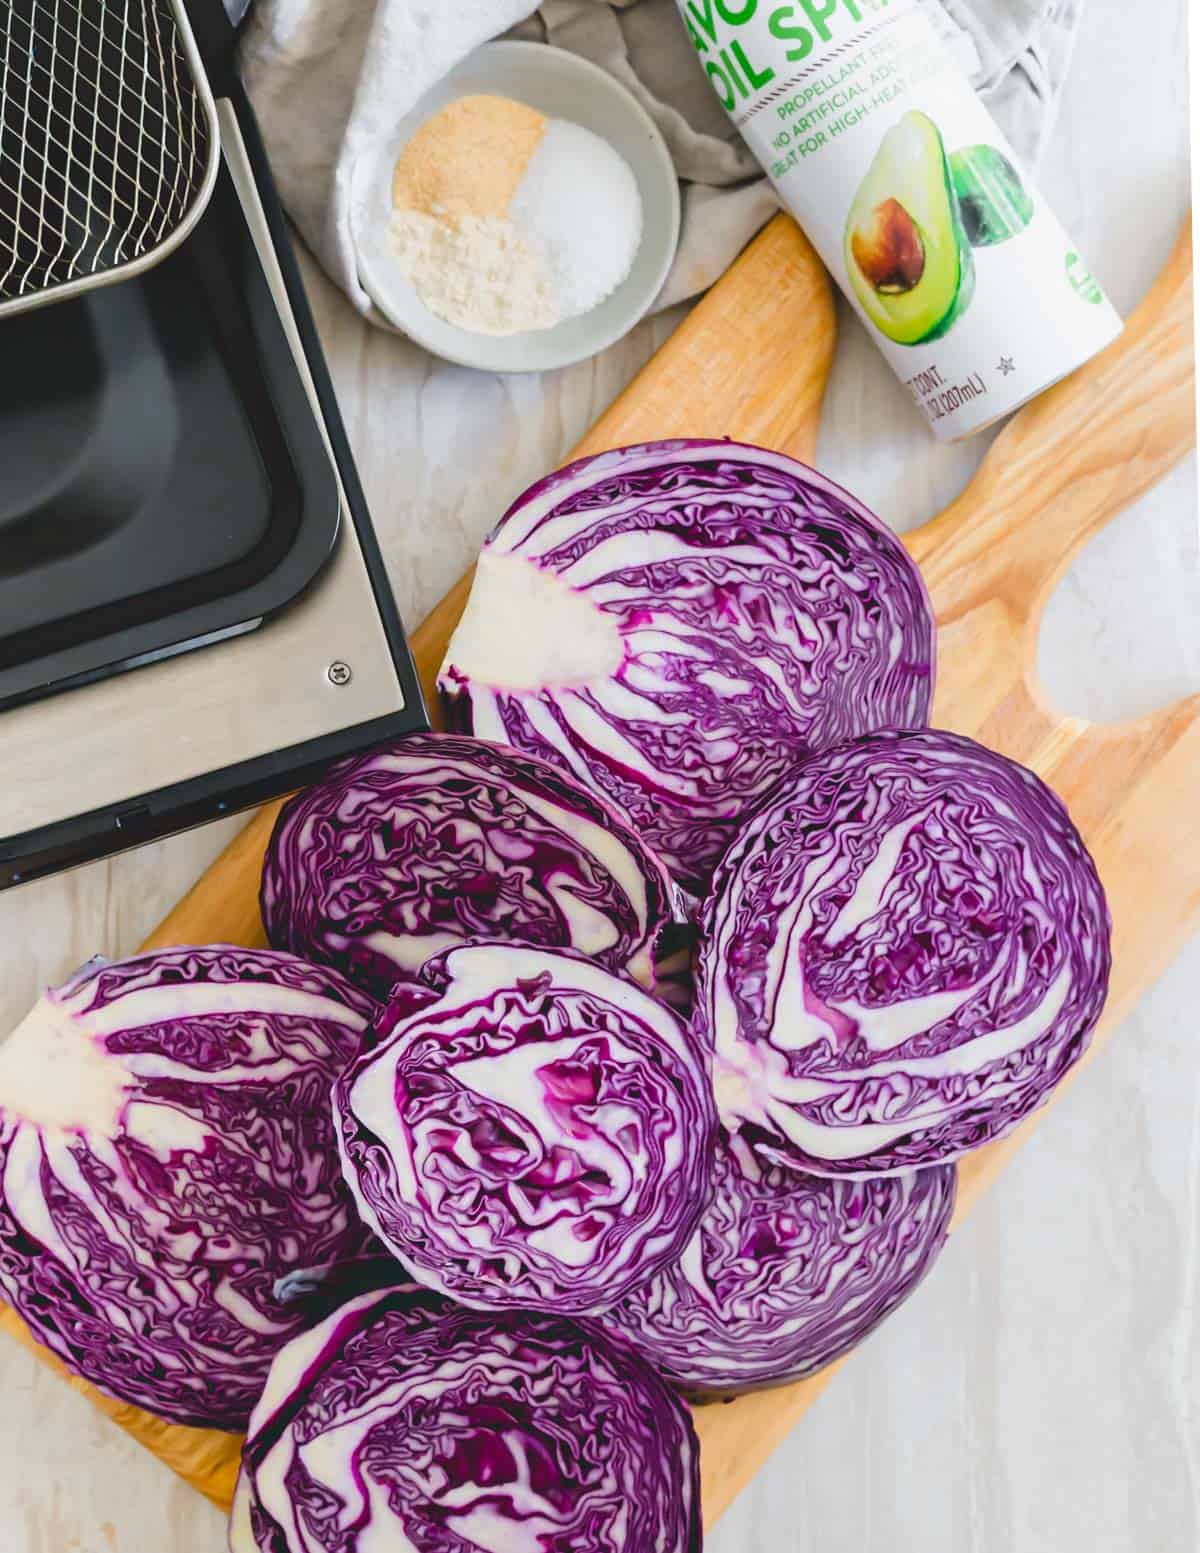 Sliced red cabbage before air frying.